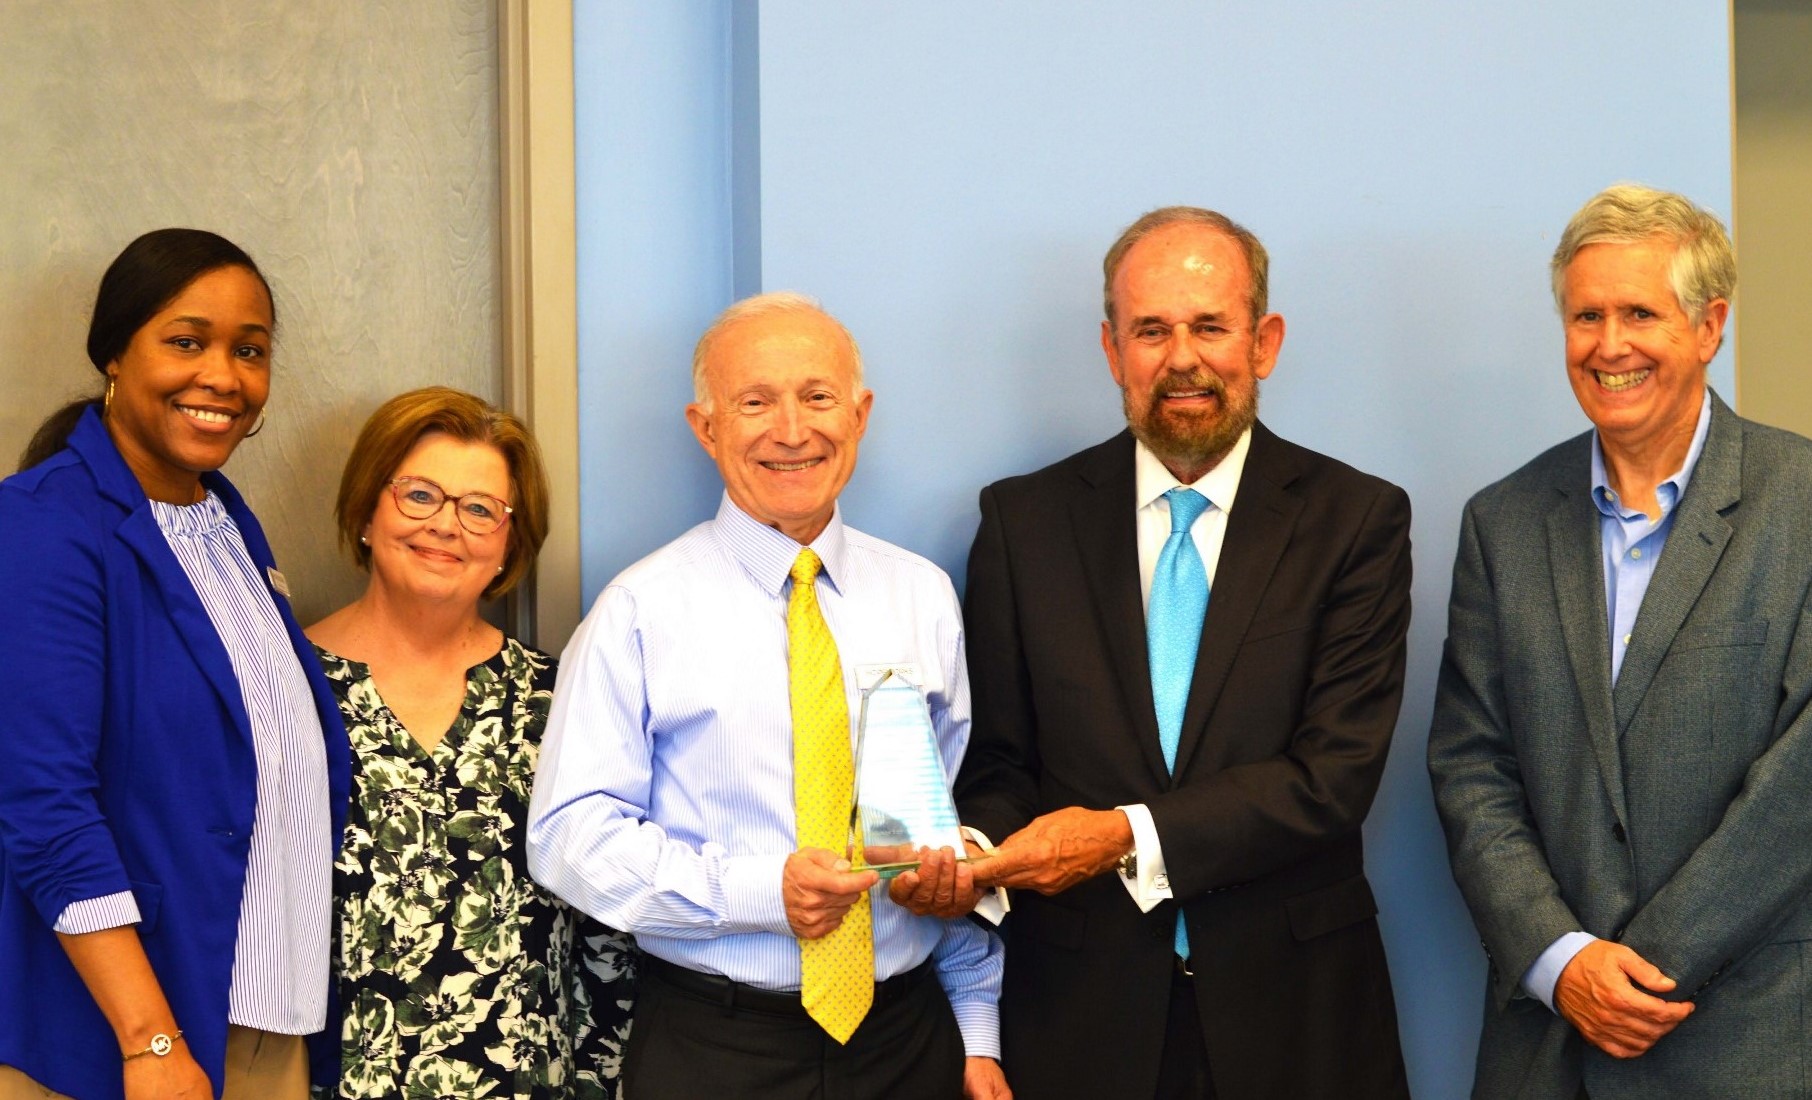 Hopeworks staff receive their coveted 2020 Chamber Quality Cup Award on Aug. 2, 2021 from MSQPC Executive Director Dr. Donald Fisher.